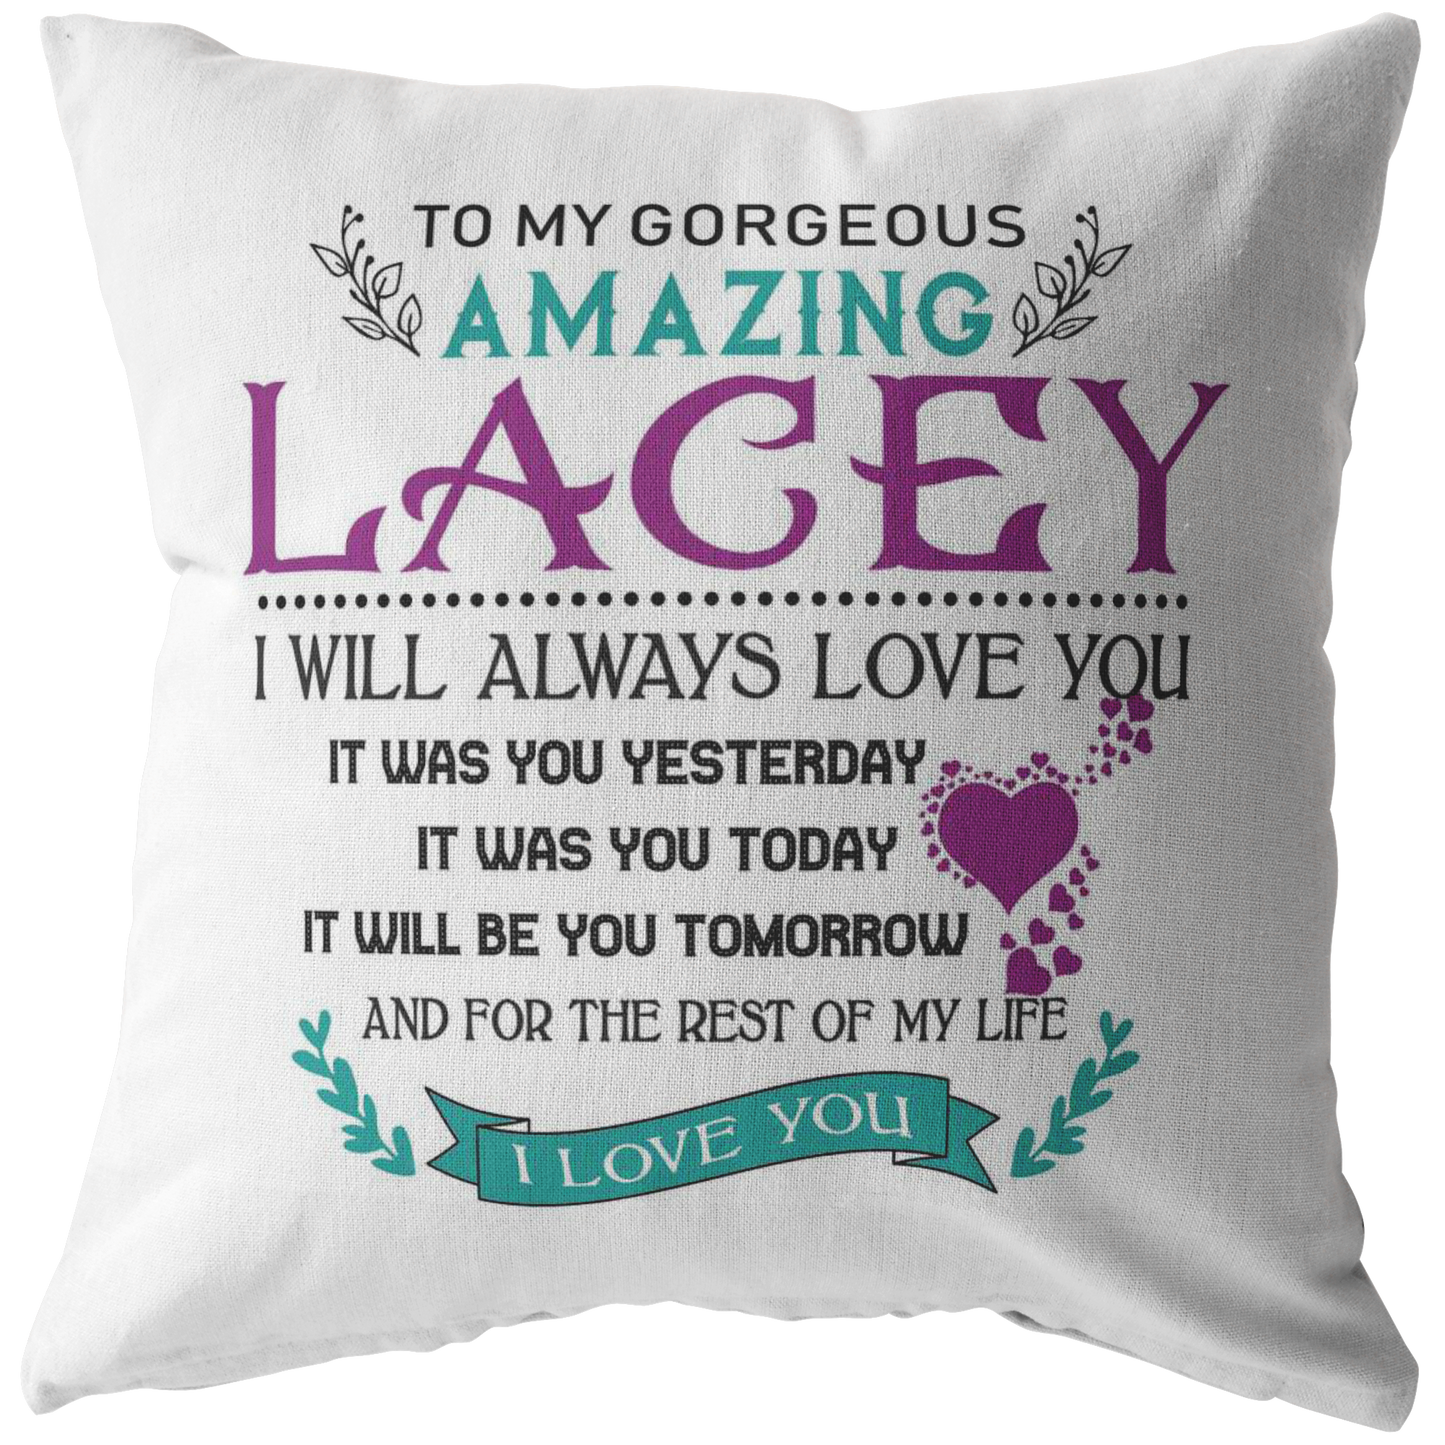 P-20414858-sp-15475 - FamilyGift for Her - to My Gorgeus Amazing Lacey I Will Alwa